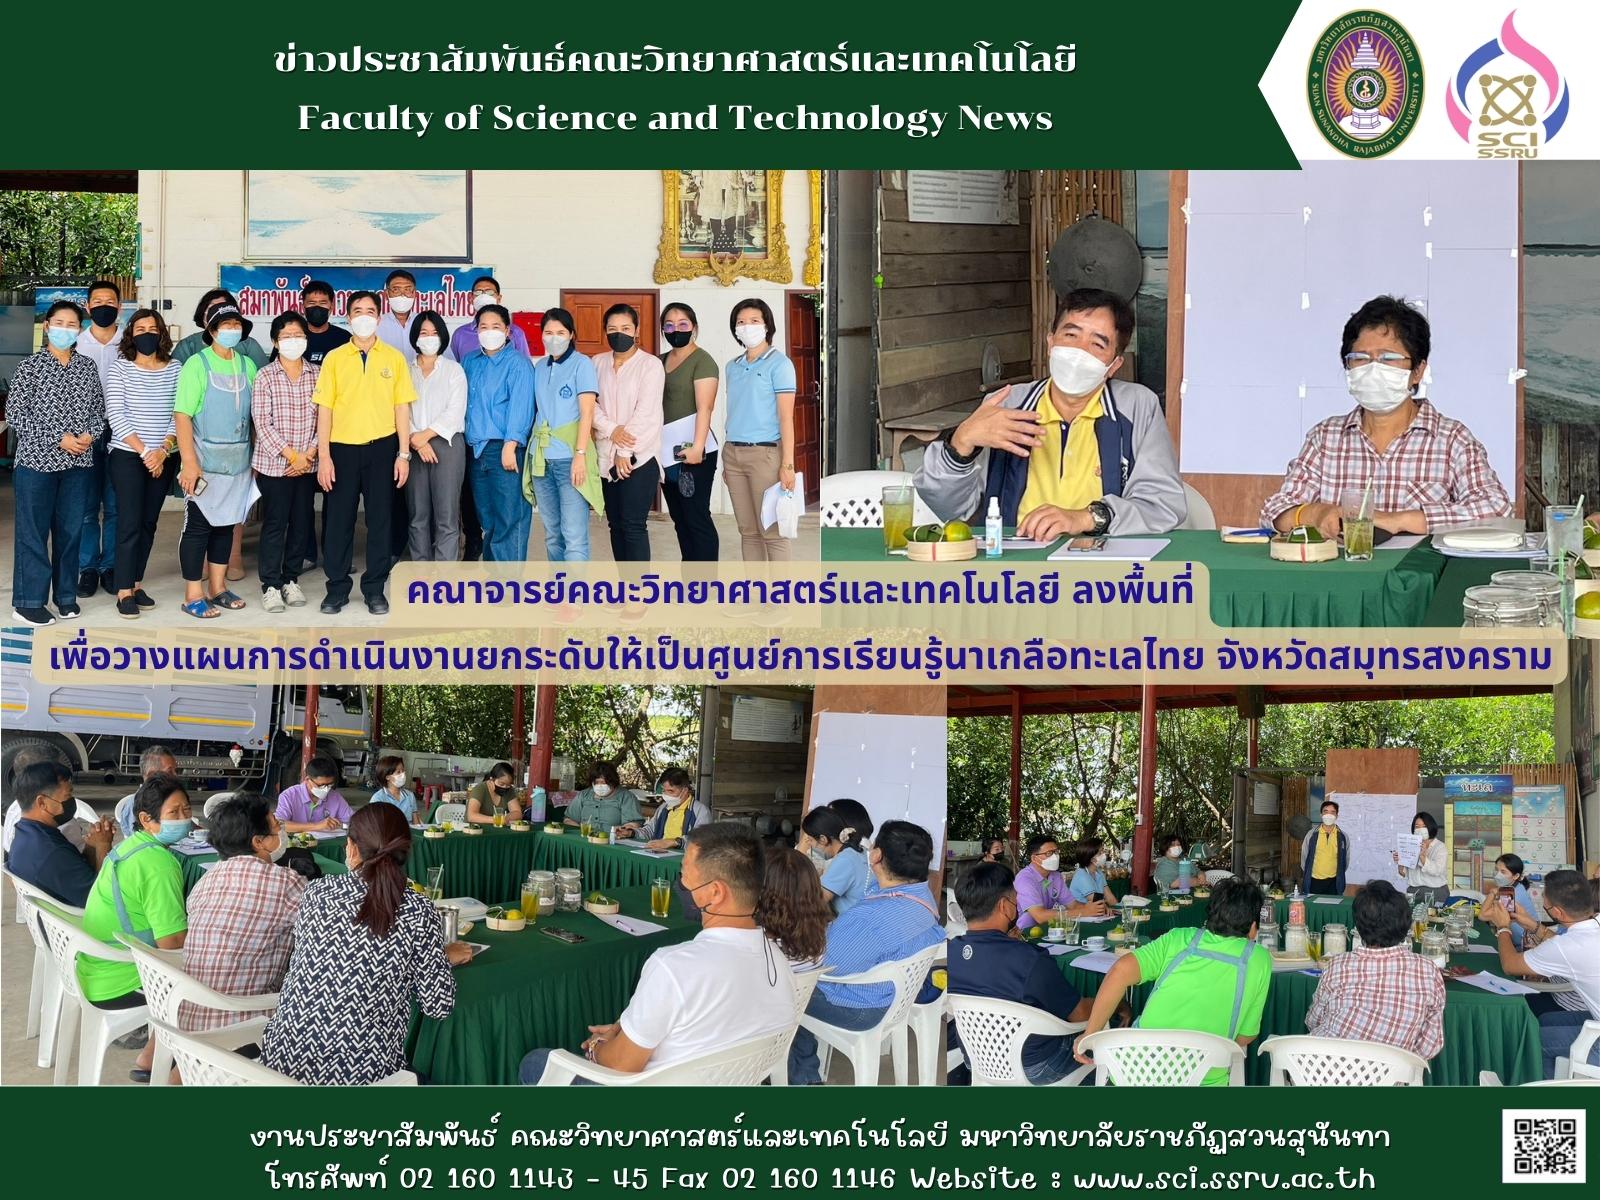 Lecturers’ Faculty of Science and Technology field to implementation planning to Thai Sea Salt Field Learning Center, Samut Songkhram province